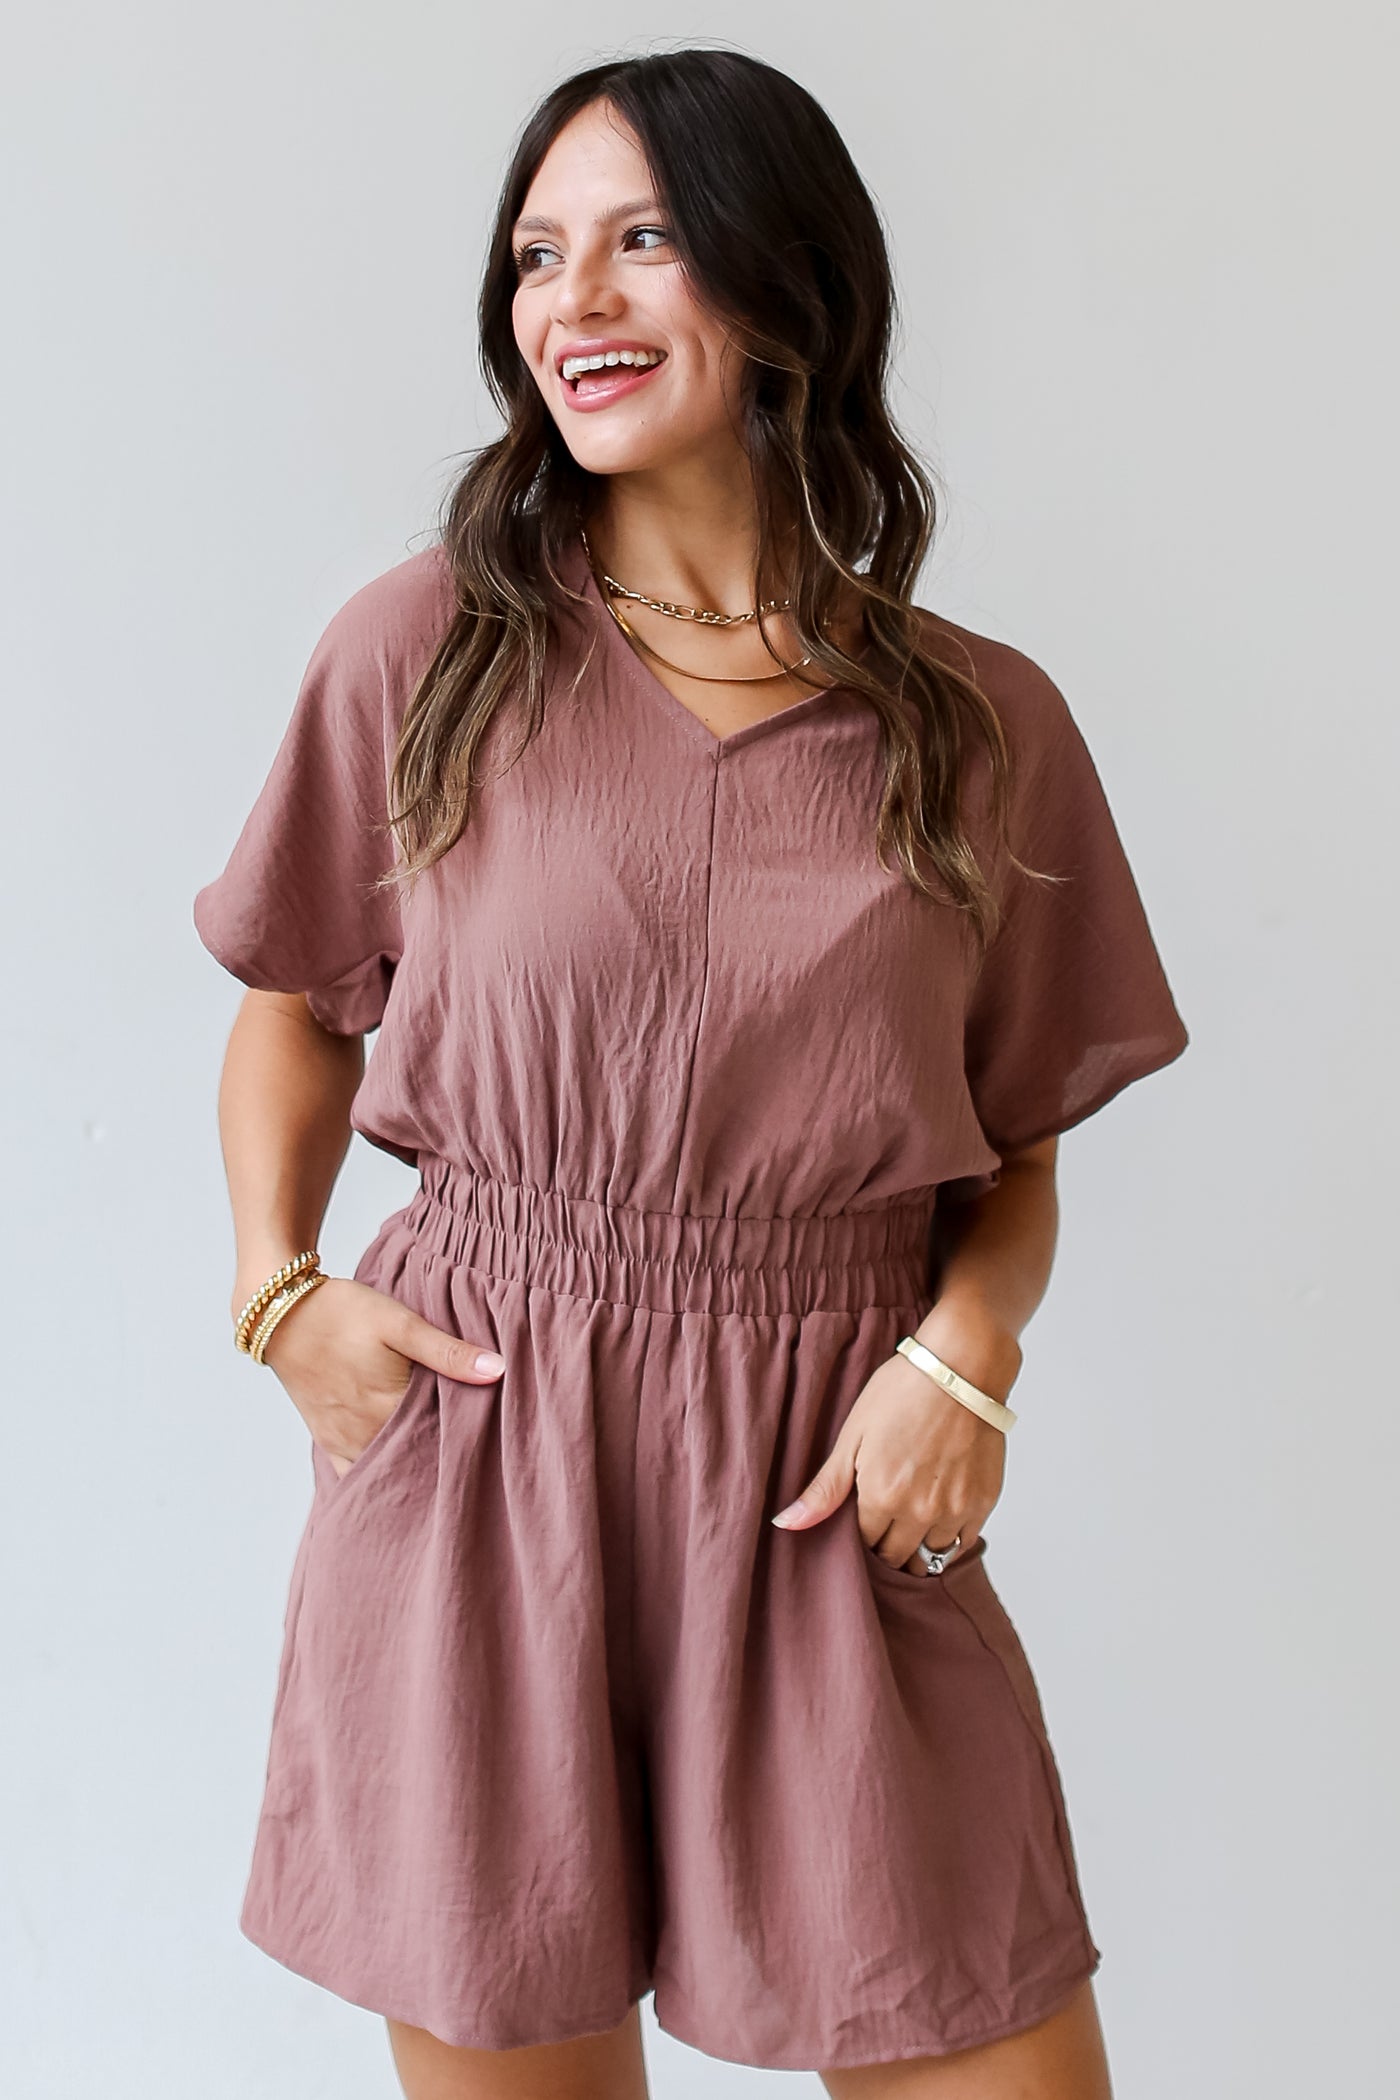 brown Romper for fall on dress up model